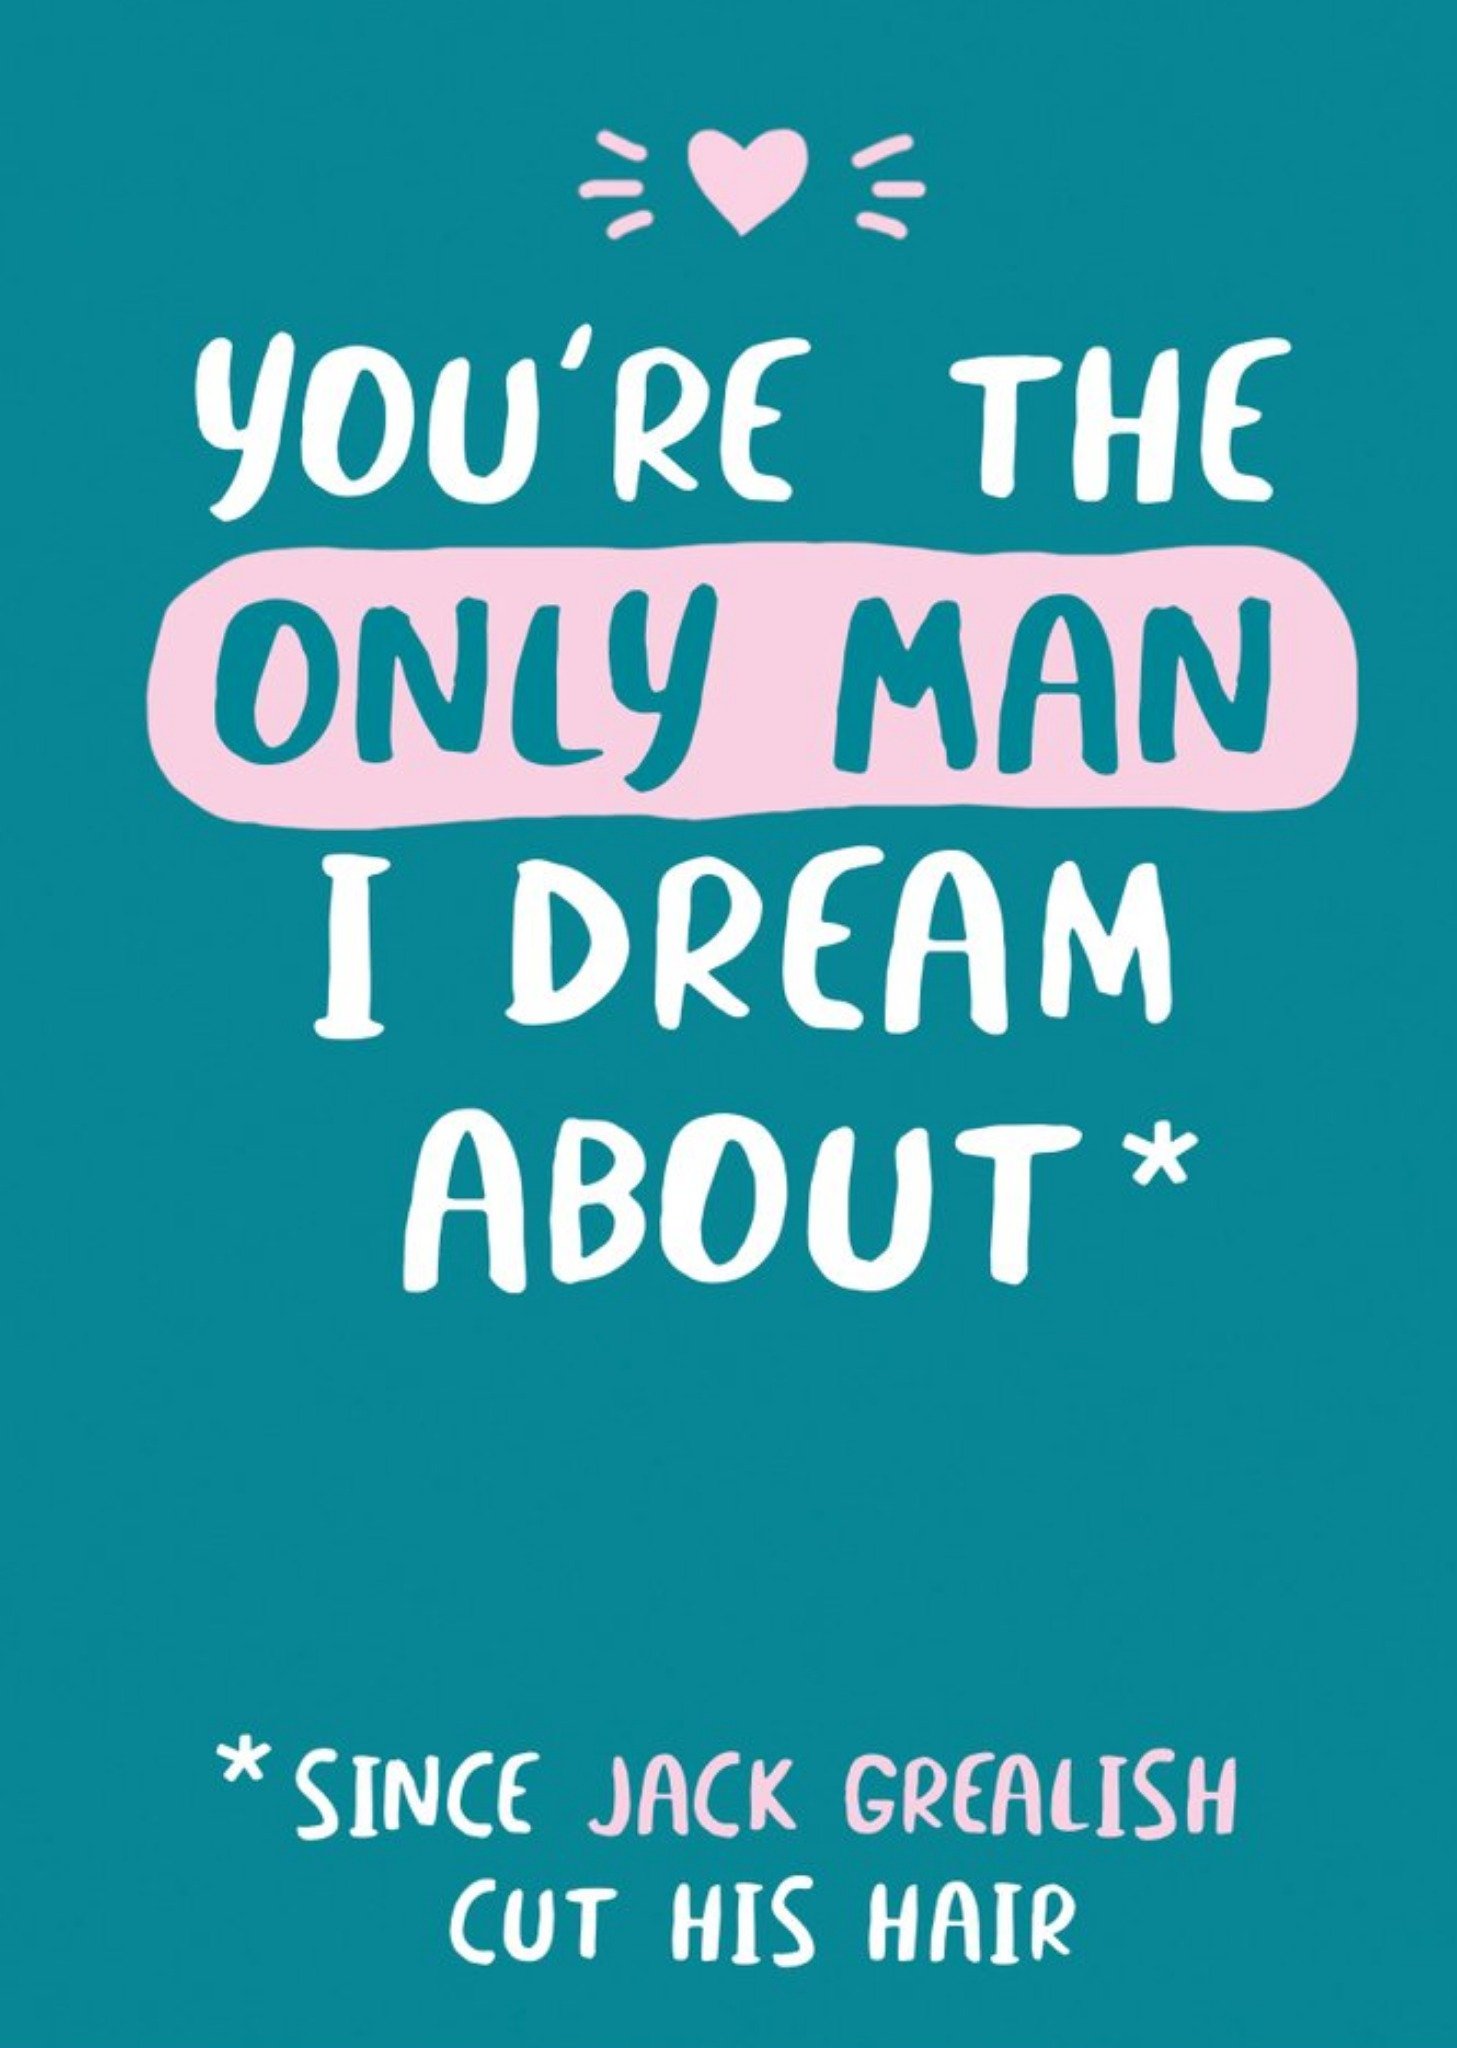 Moonpig Banter Illustrated Funny Quote Sports Dream Adult Humour Card, Large